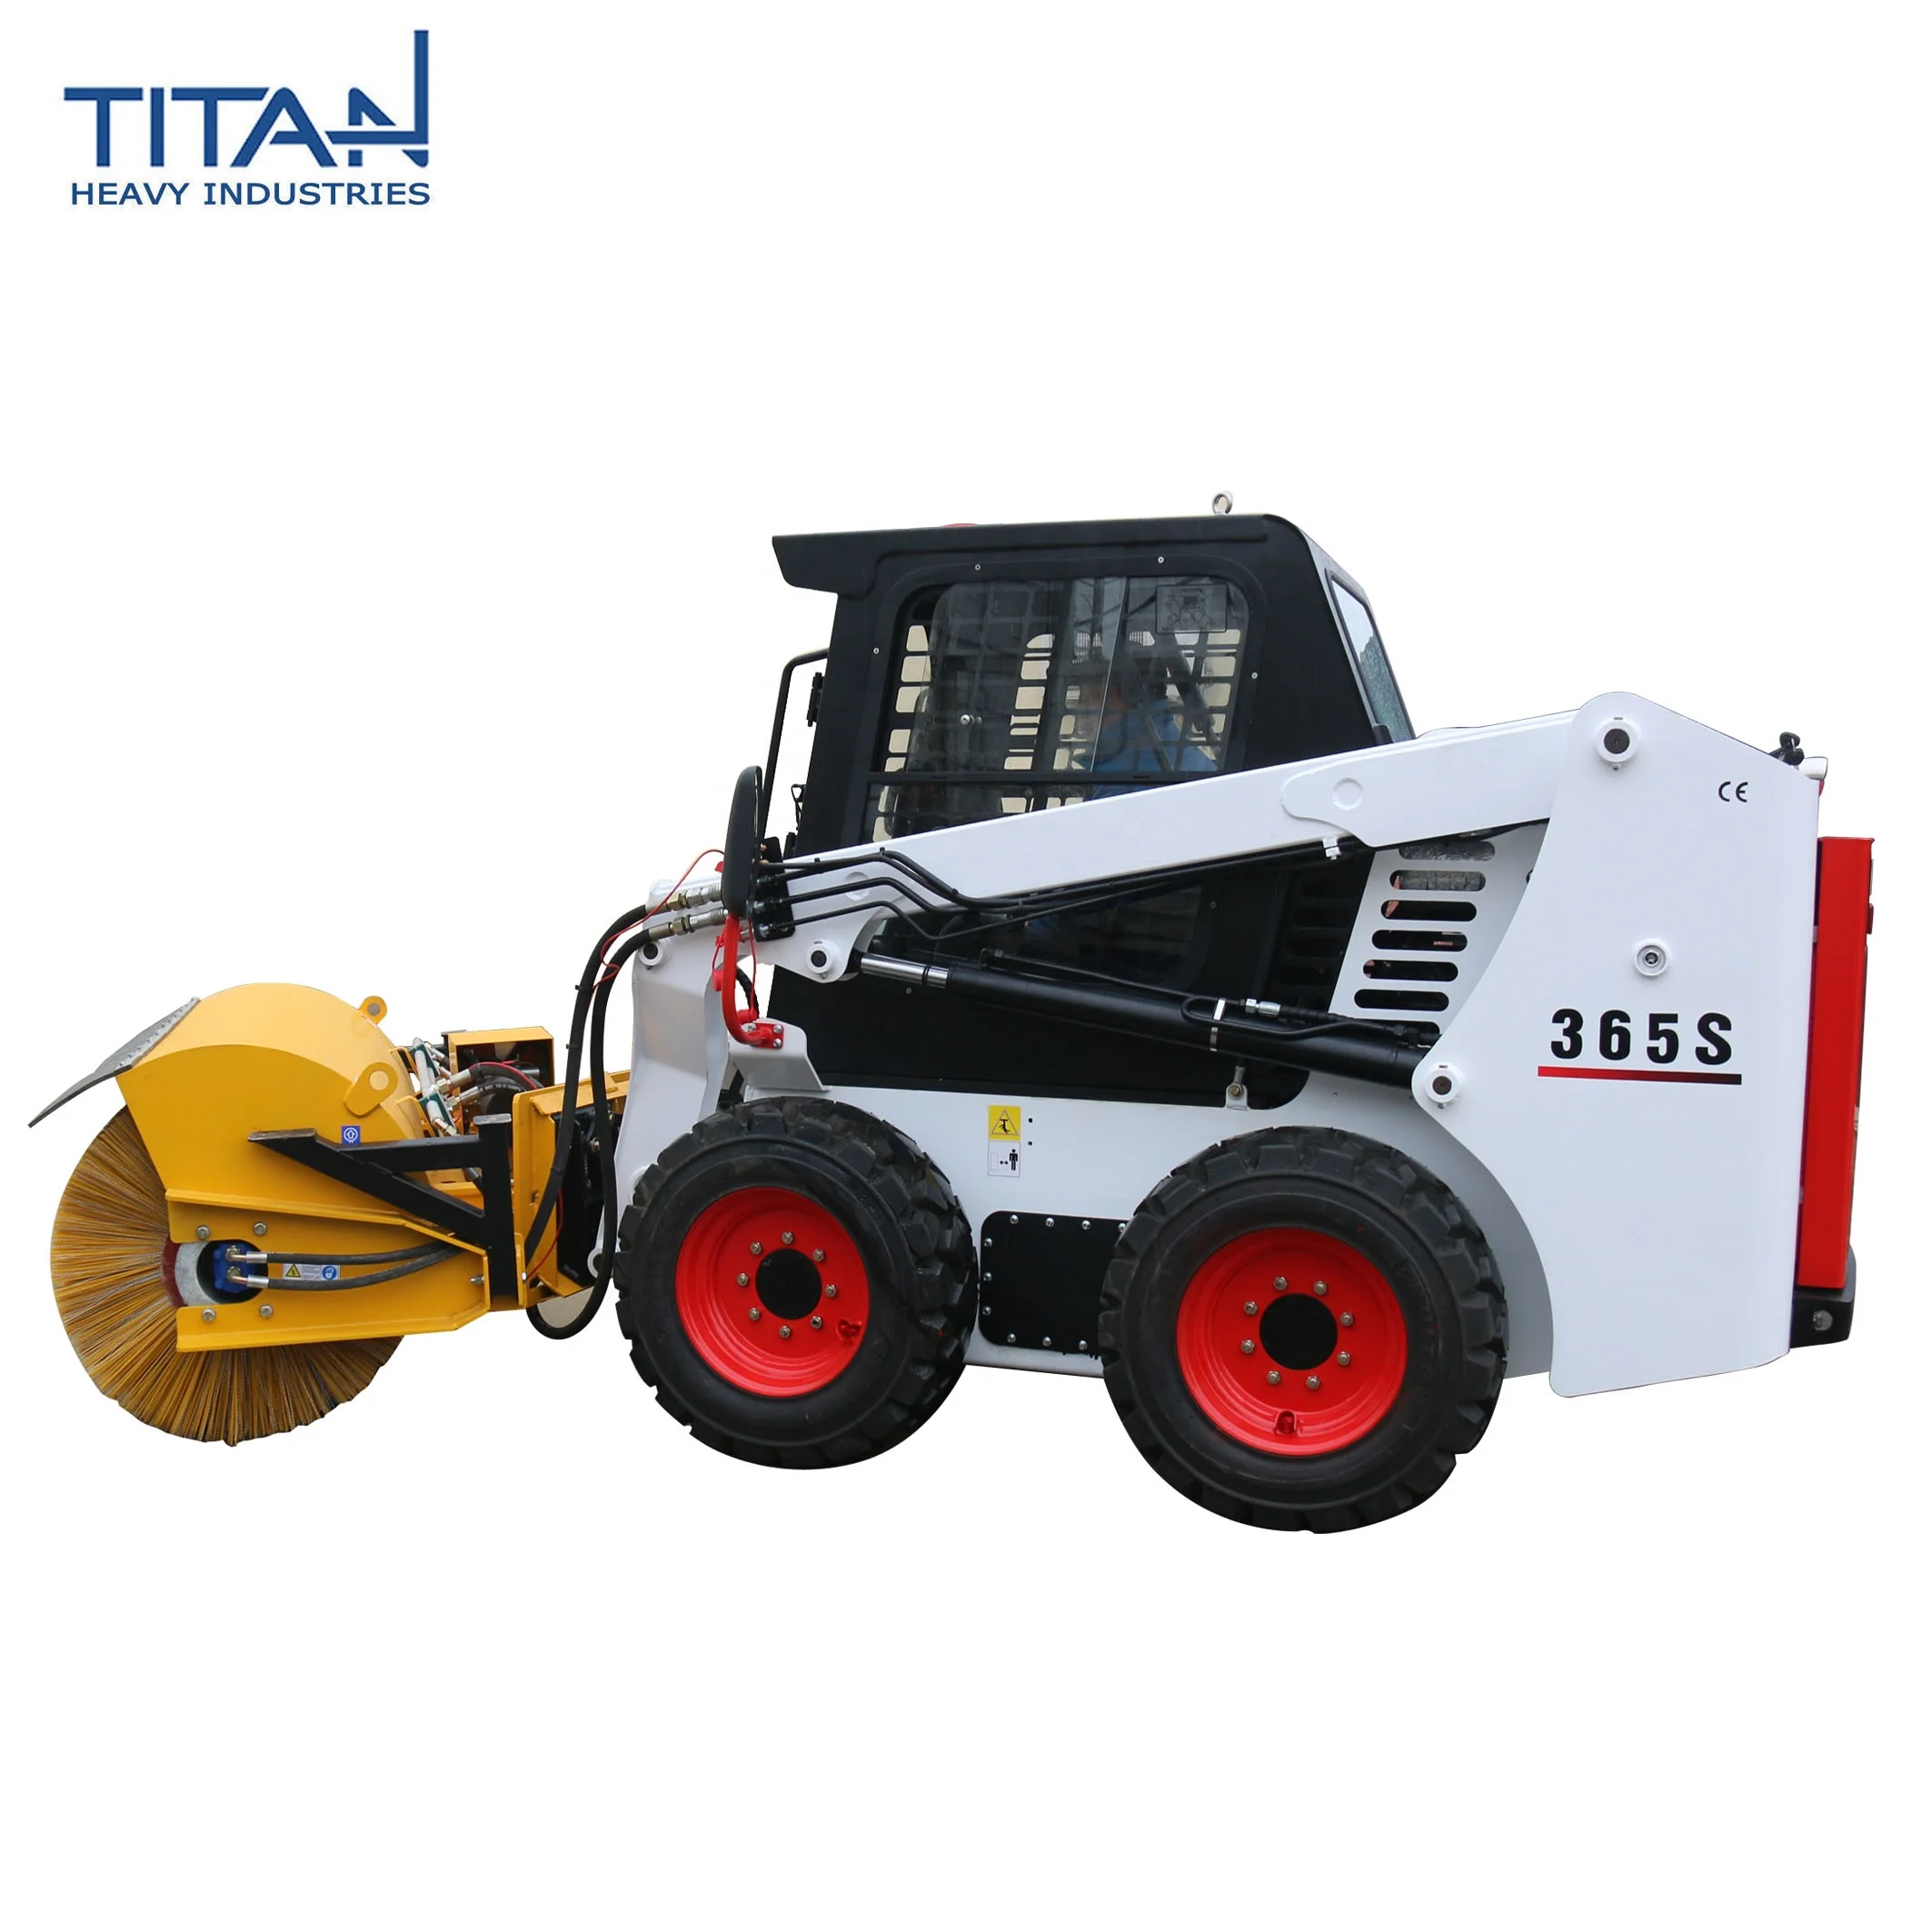 Ty-365s Chinese Best Ce Accessories Rated Load 900kg Mini Small Backhoe Wheeled Skid Steer Loader For Sale Buy 900kg Mini Skid Steer Loader For Sale,Mini Skid Steer Loaders With